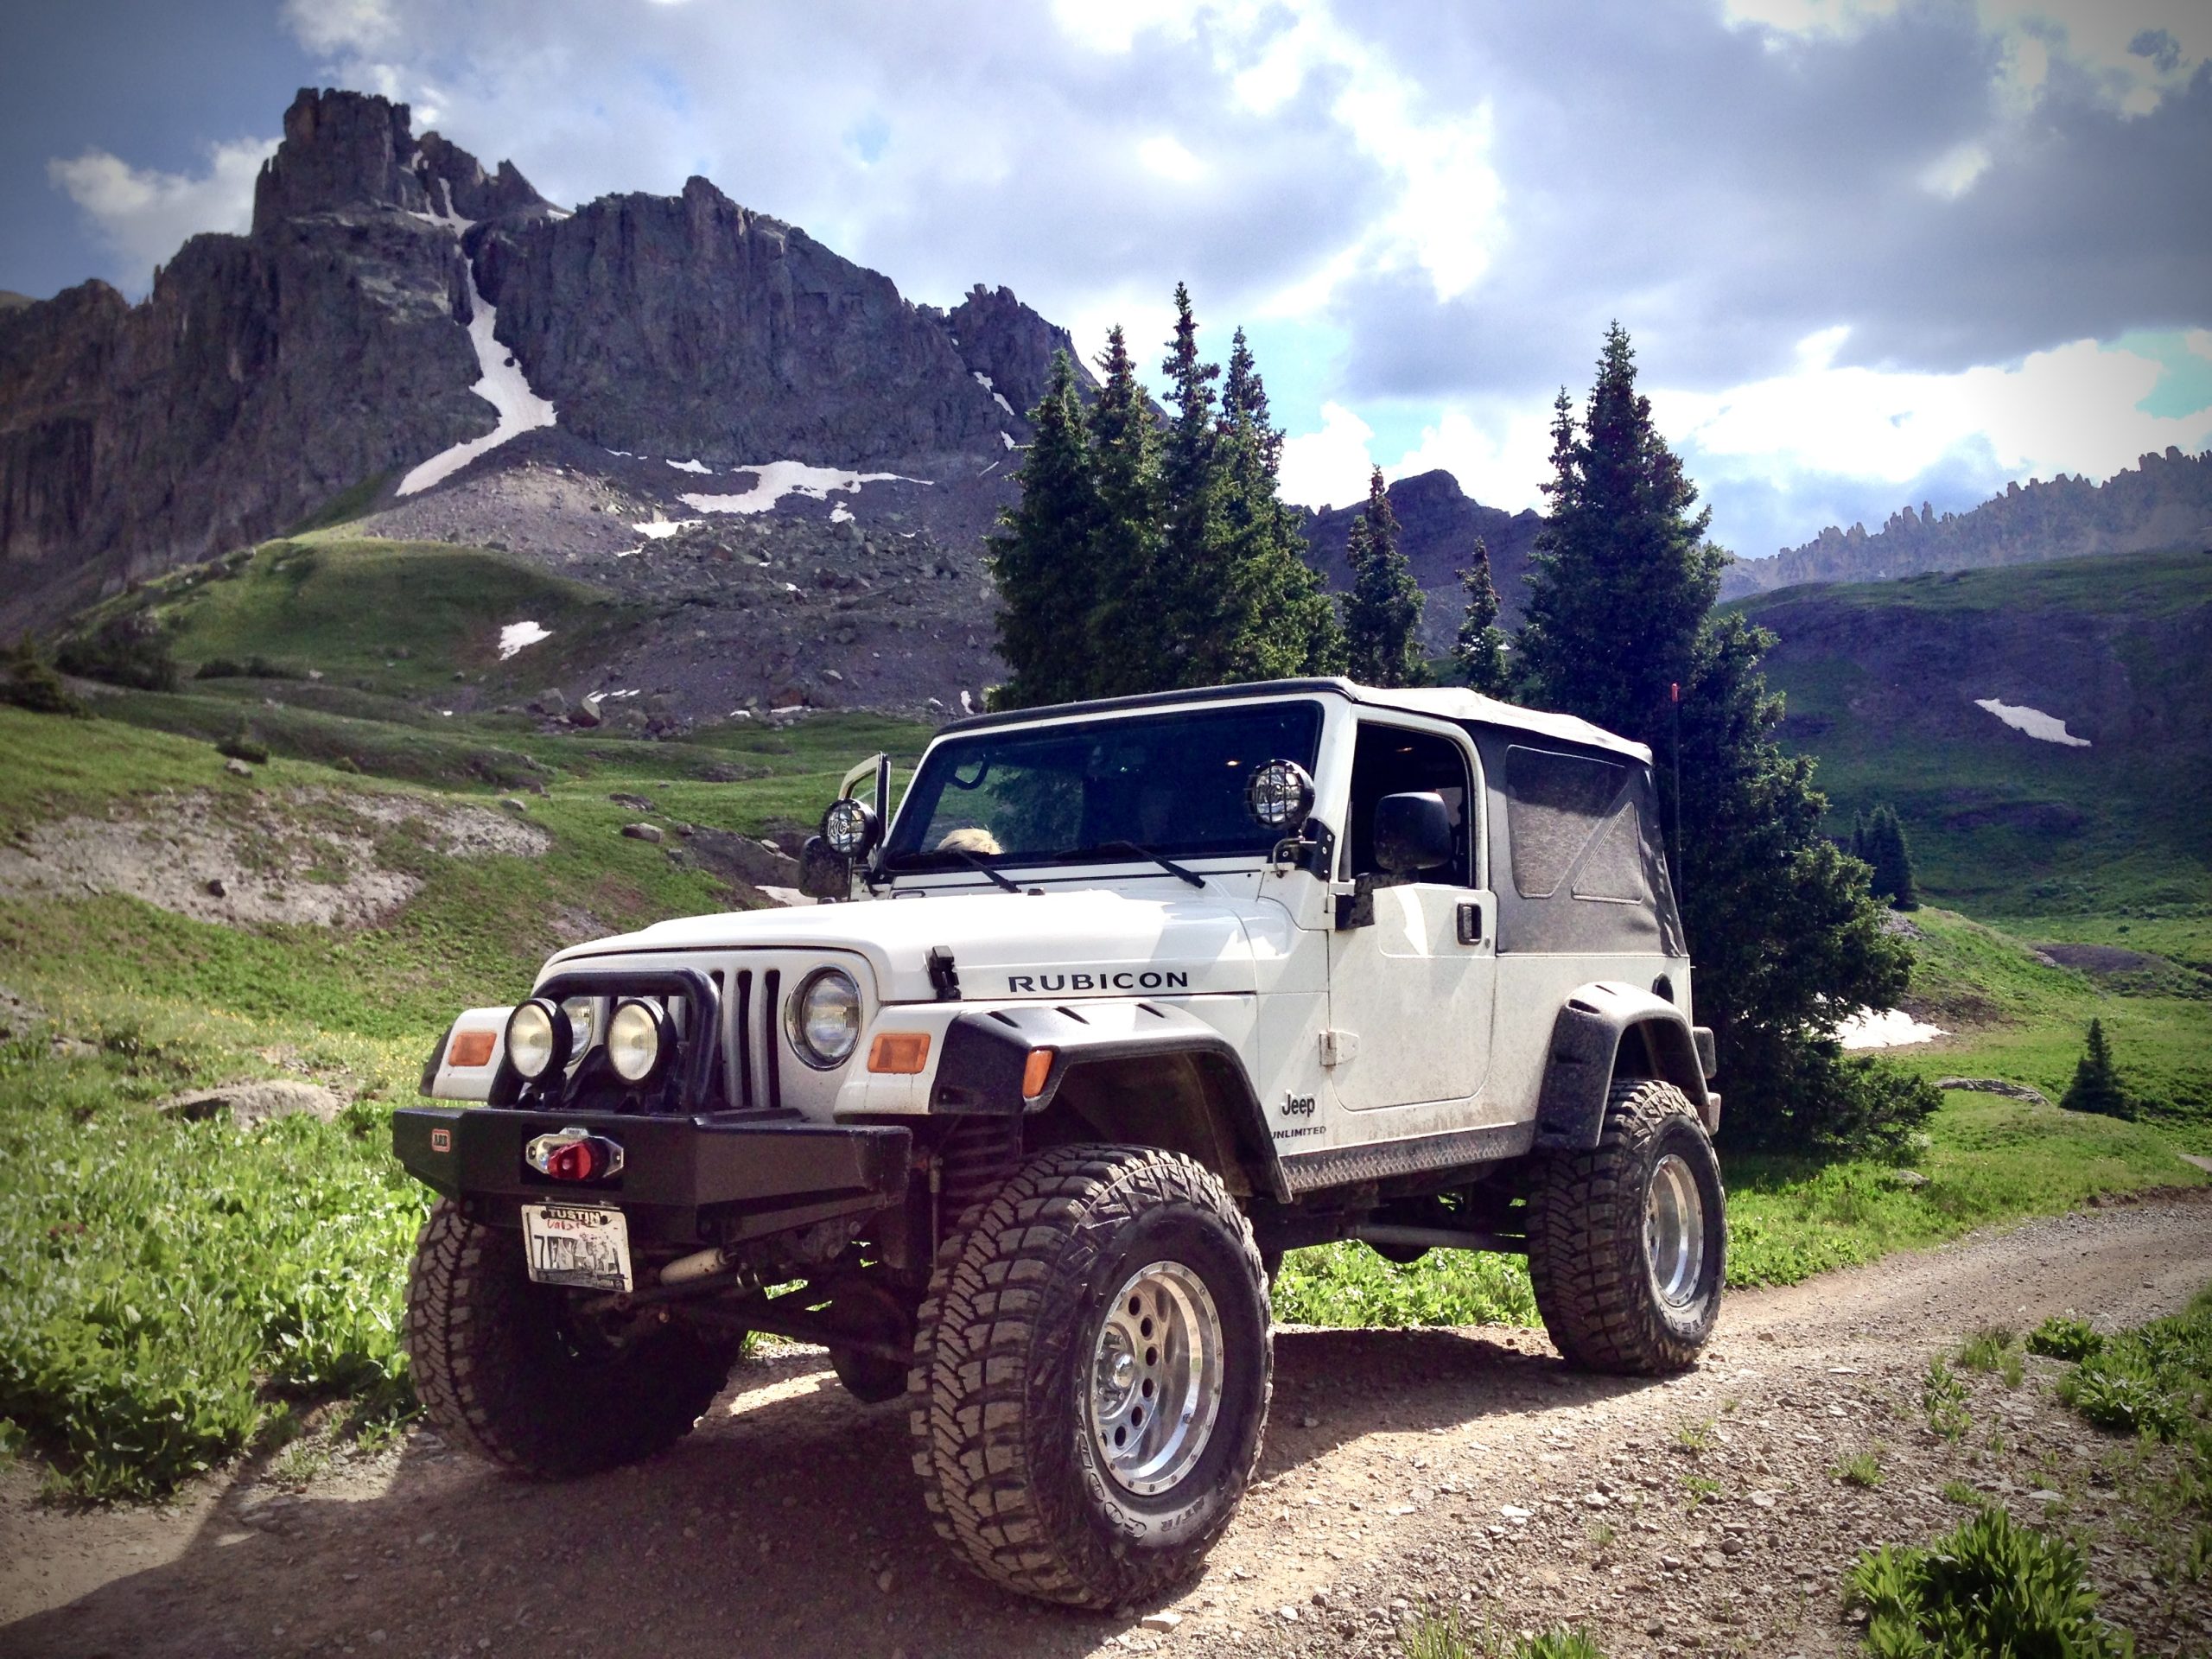 Overland Classifieds :: 2006 Jeep Wrangler Rubicon Unlimited LJ -  Expedition Portal